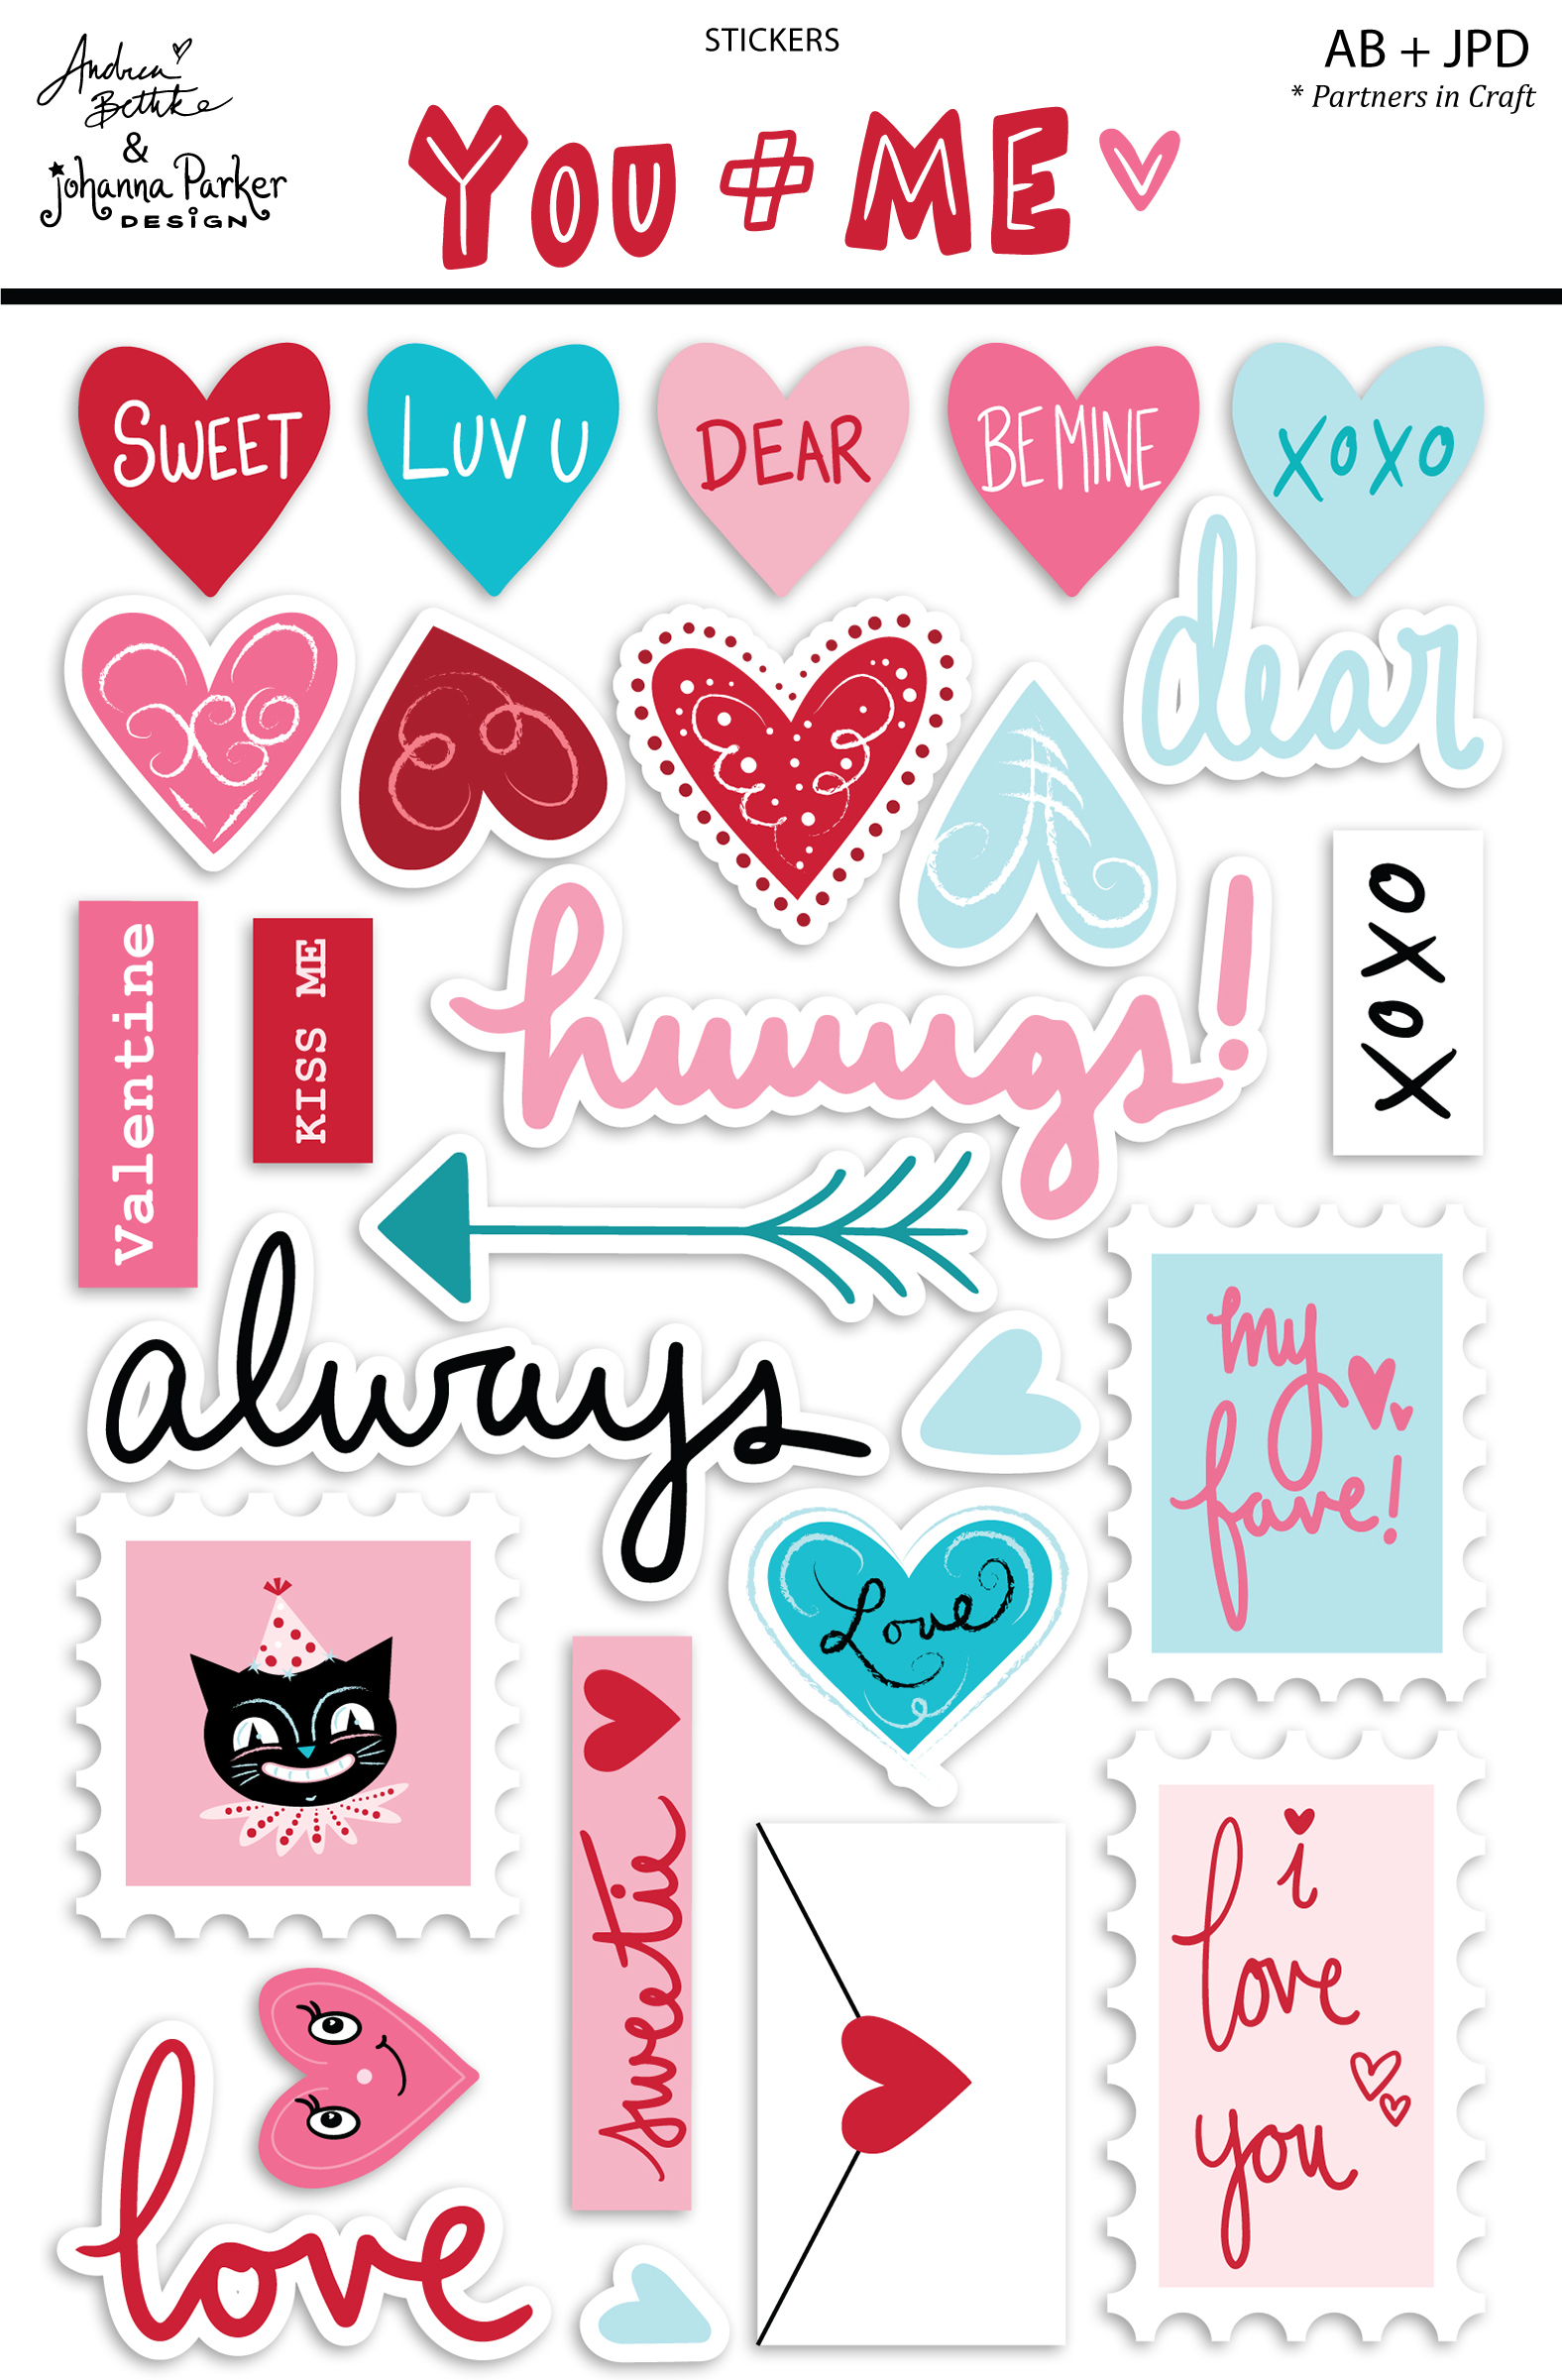 You + Me - Stickers with packaging.jpg